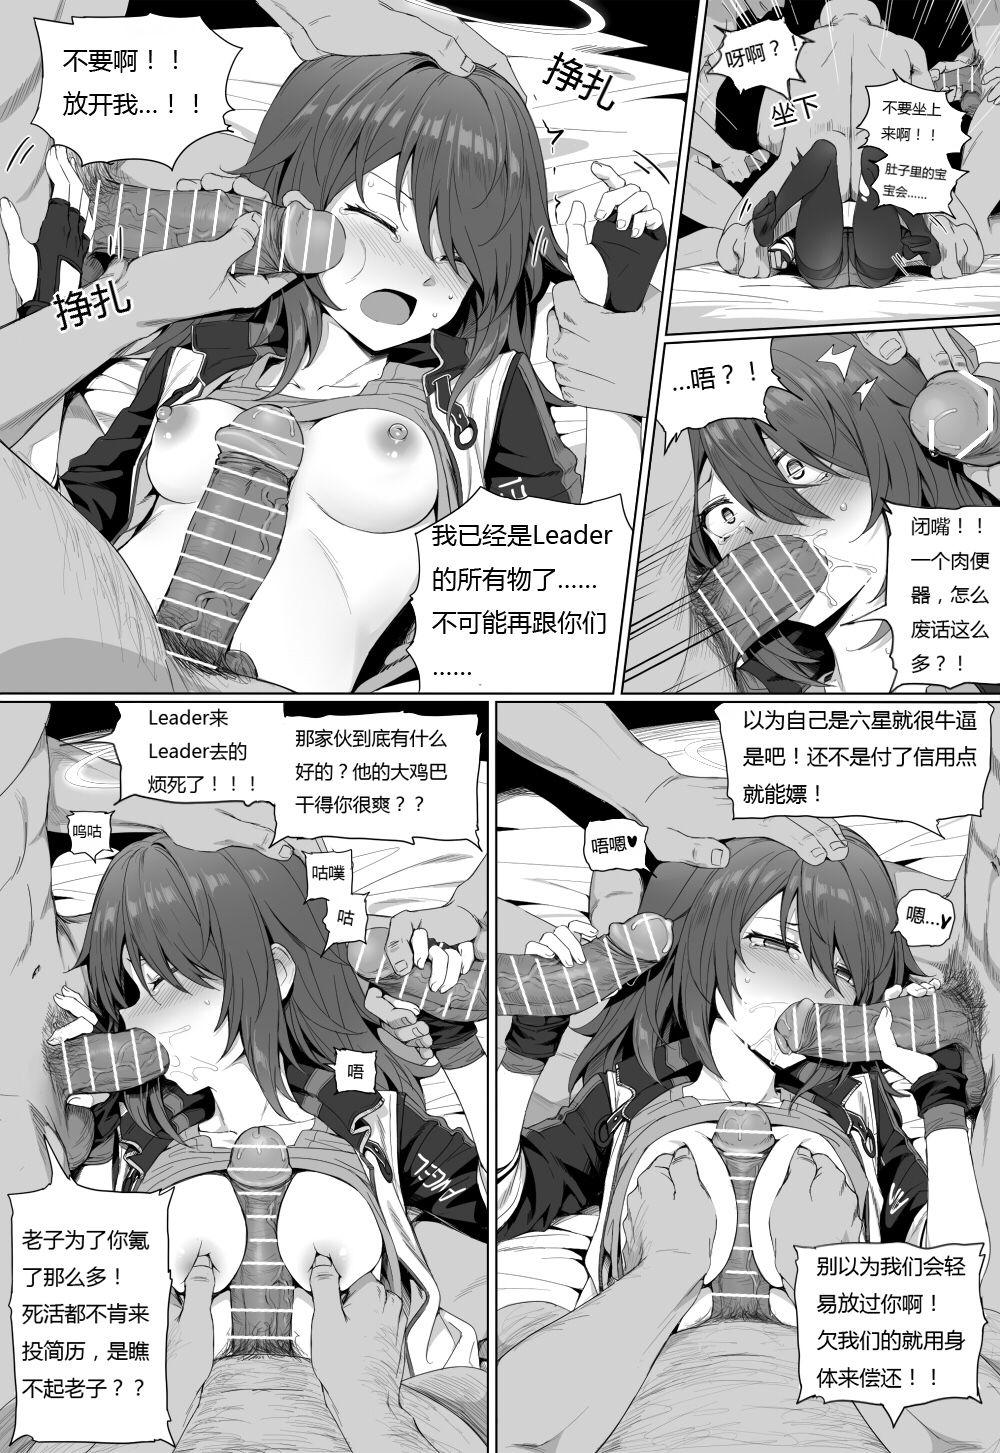 Hole Impotent Fury - Arknights Insertion - Page 7